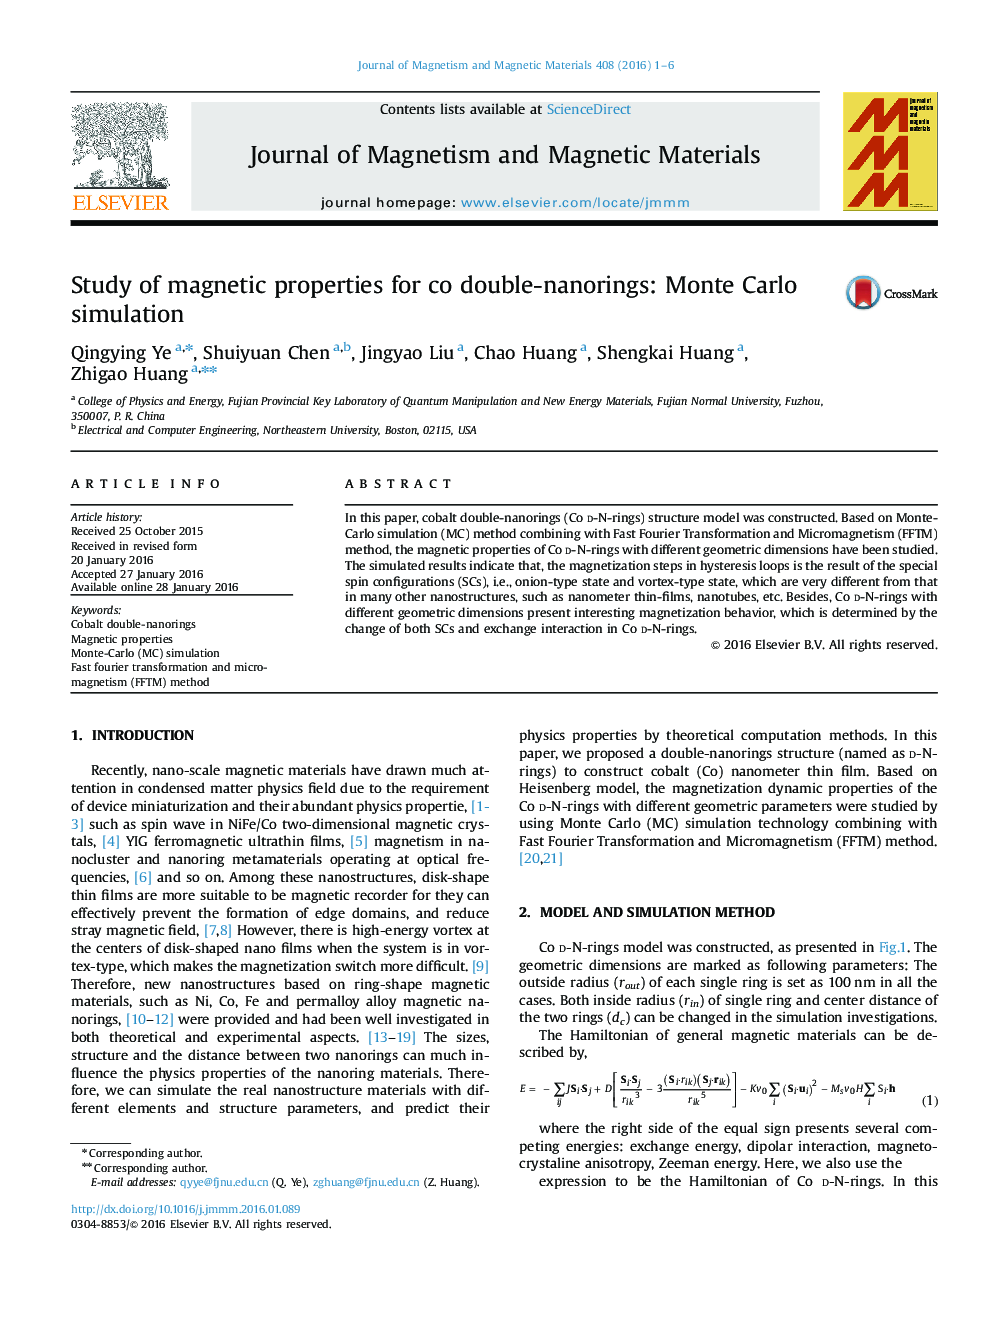 Study of magnetic properties for co double-nanorings: Monte Carlo simulation